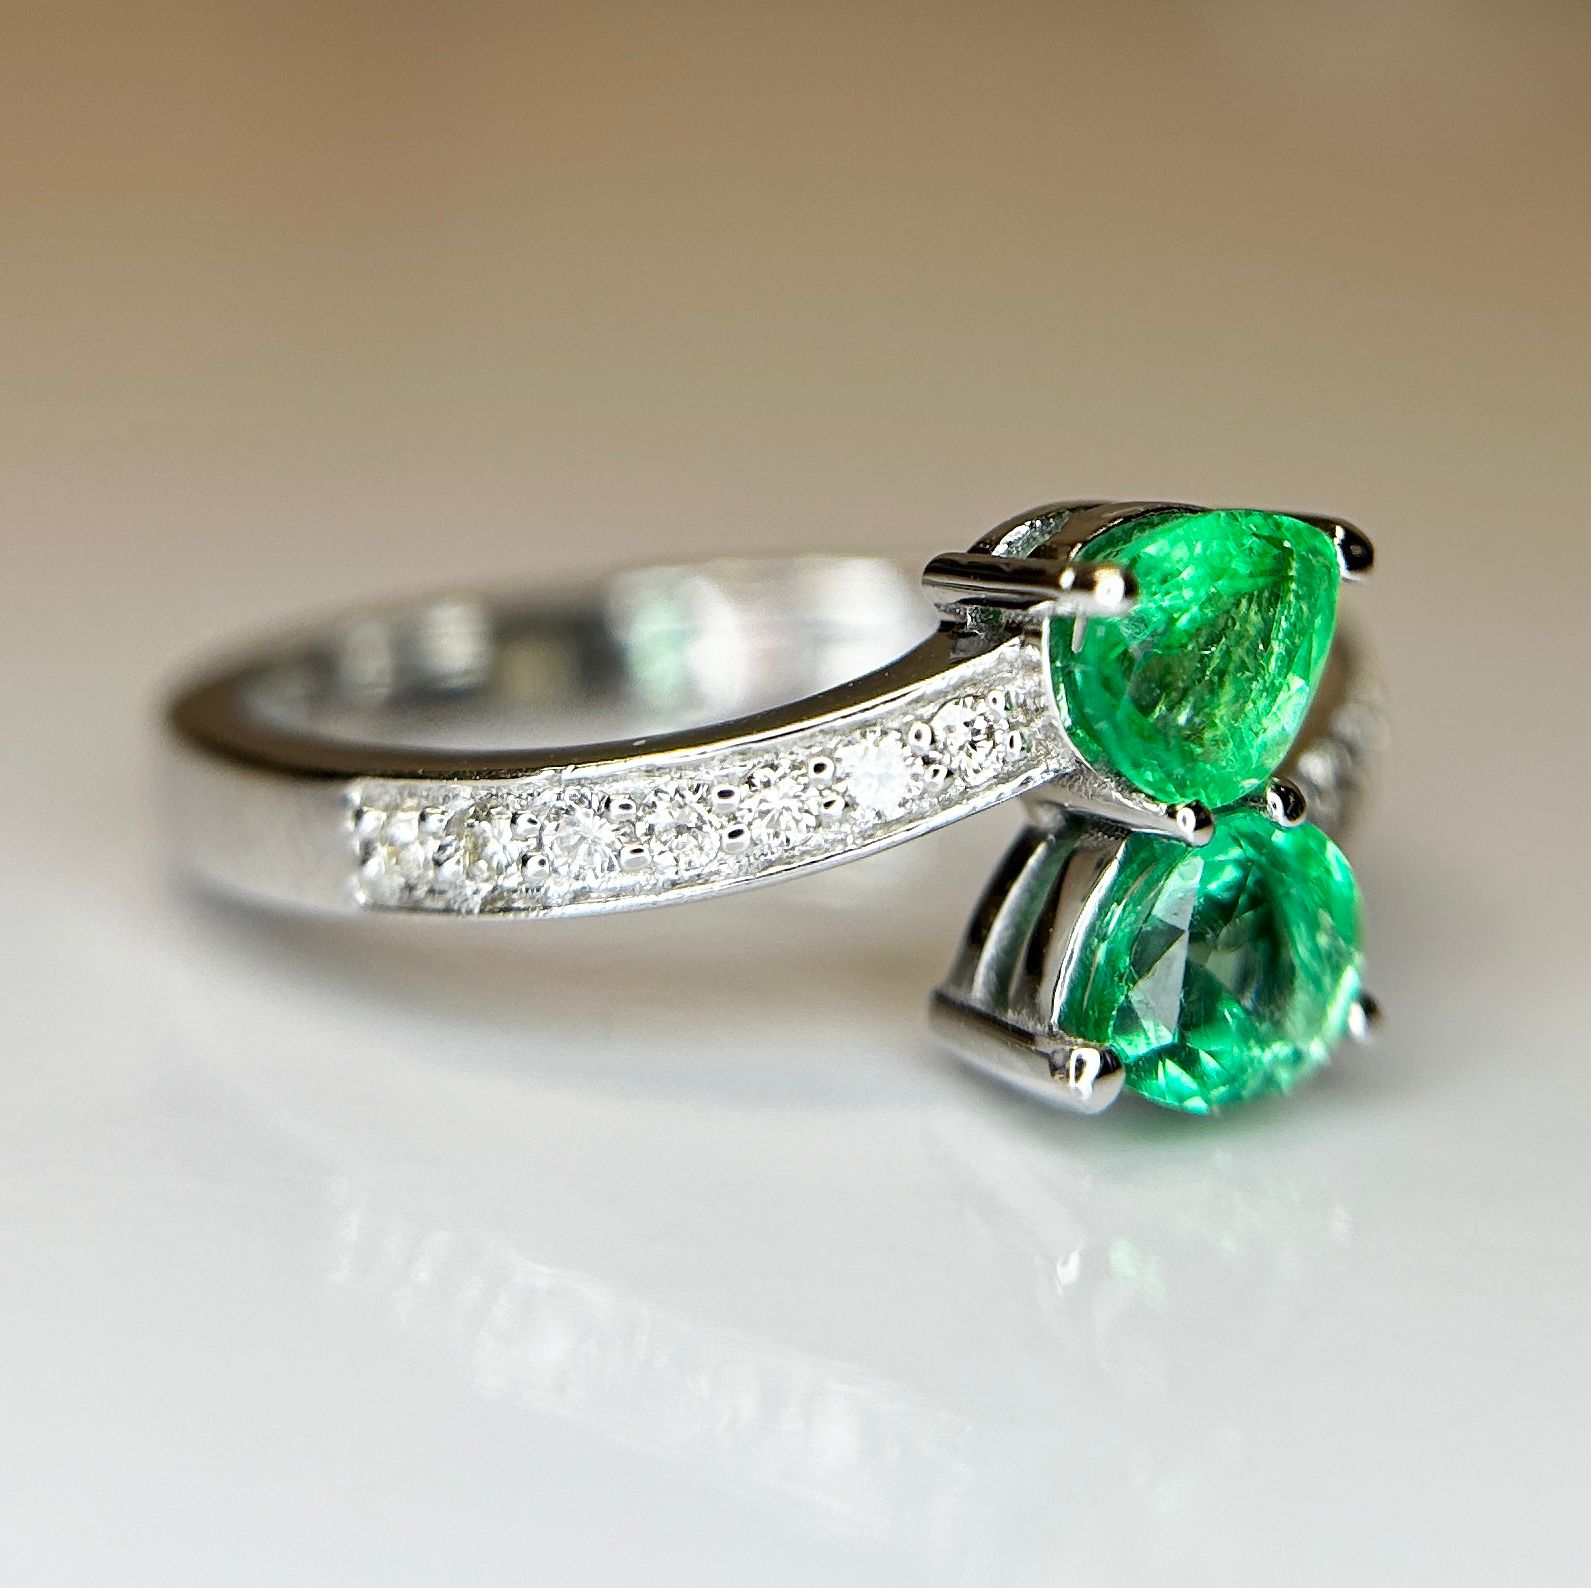 Slytherin Harry Potter Natural Emerald Ring With Natural Diamonds and 18k Gold - Image 6 of 7